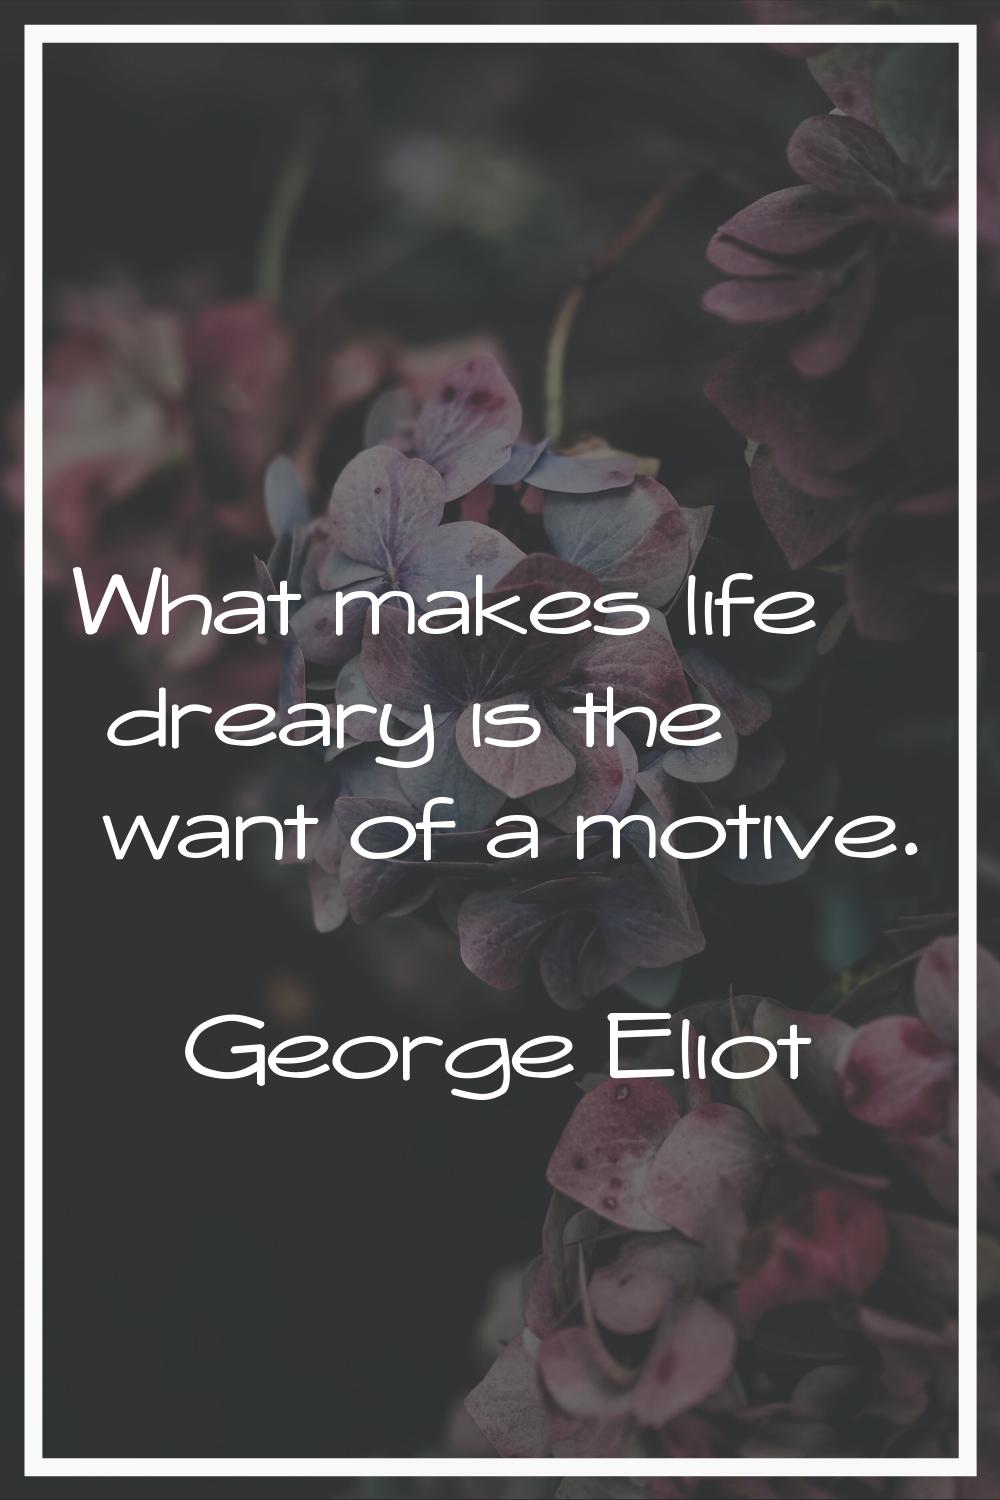 What makes life dreary is the want of a motive.